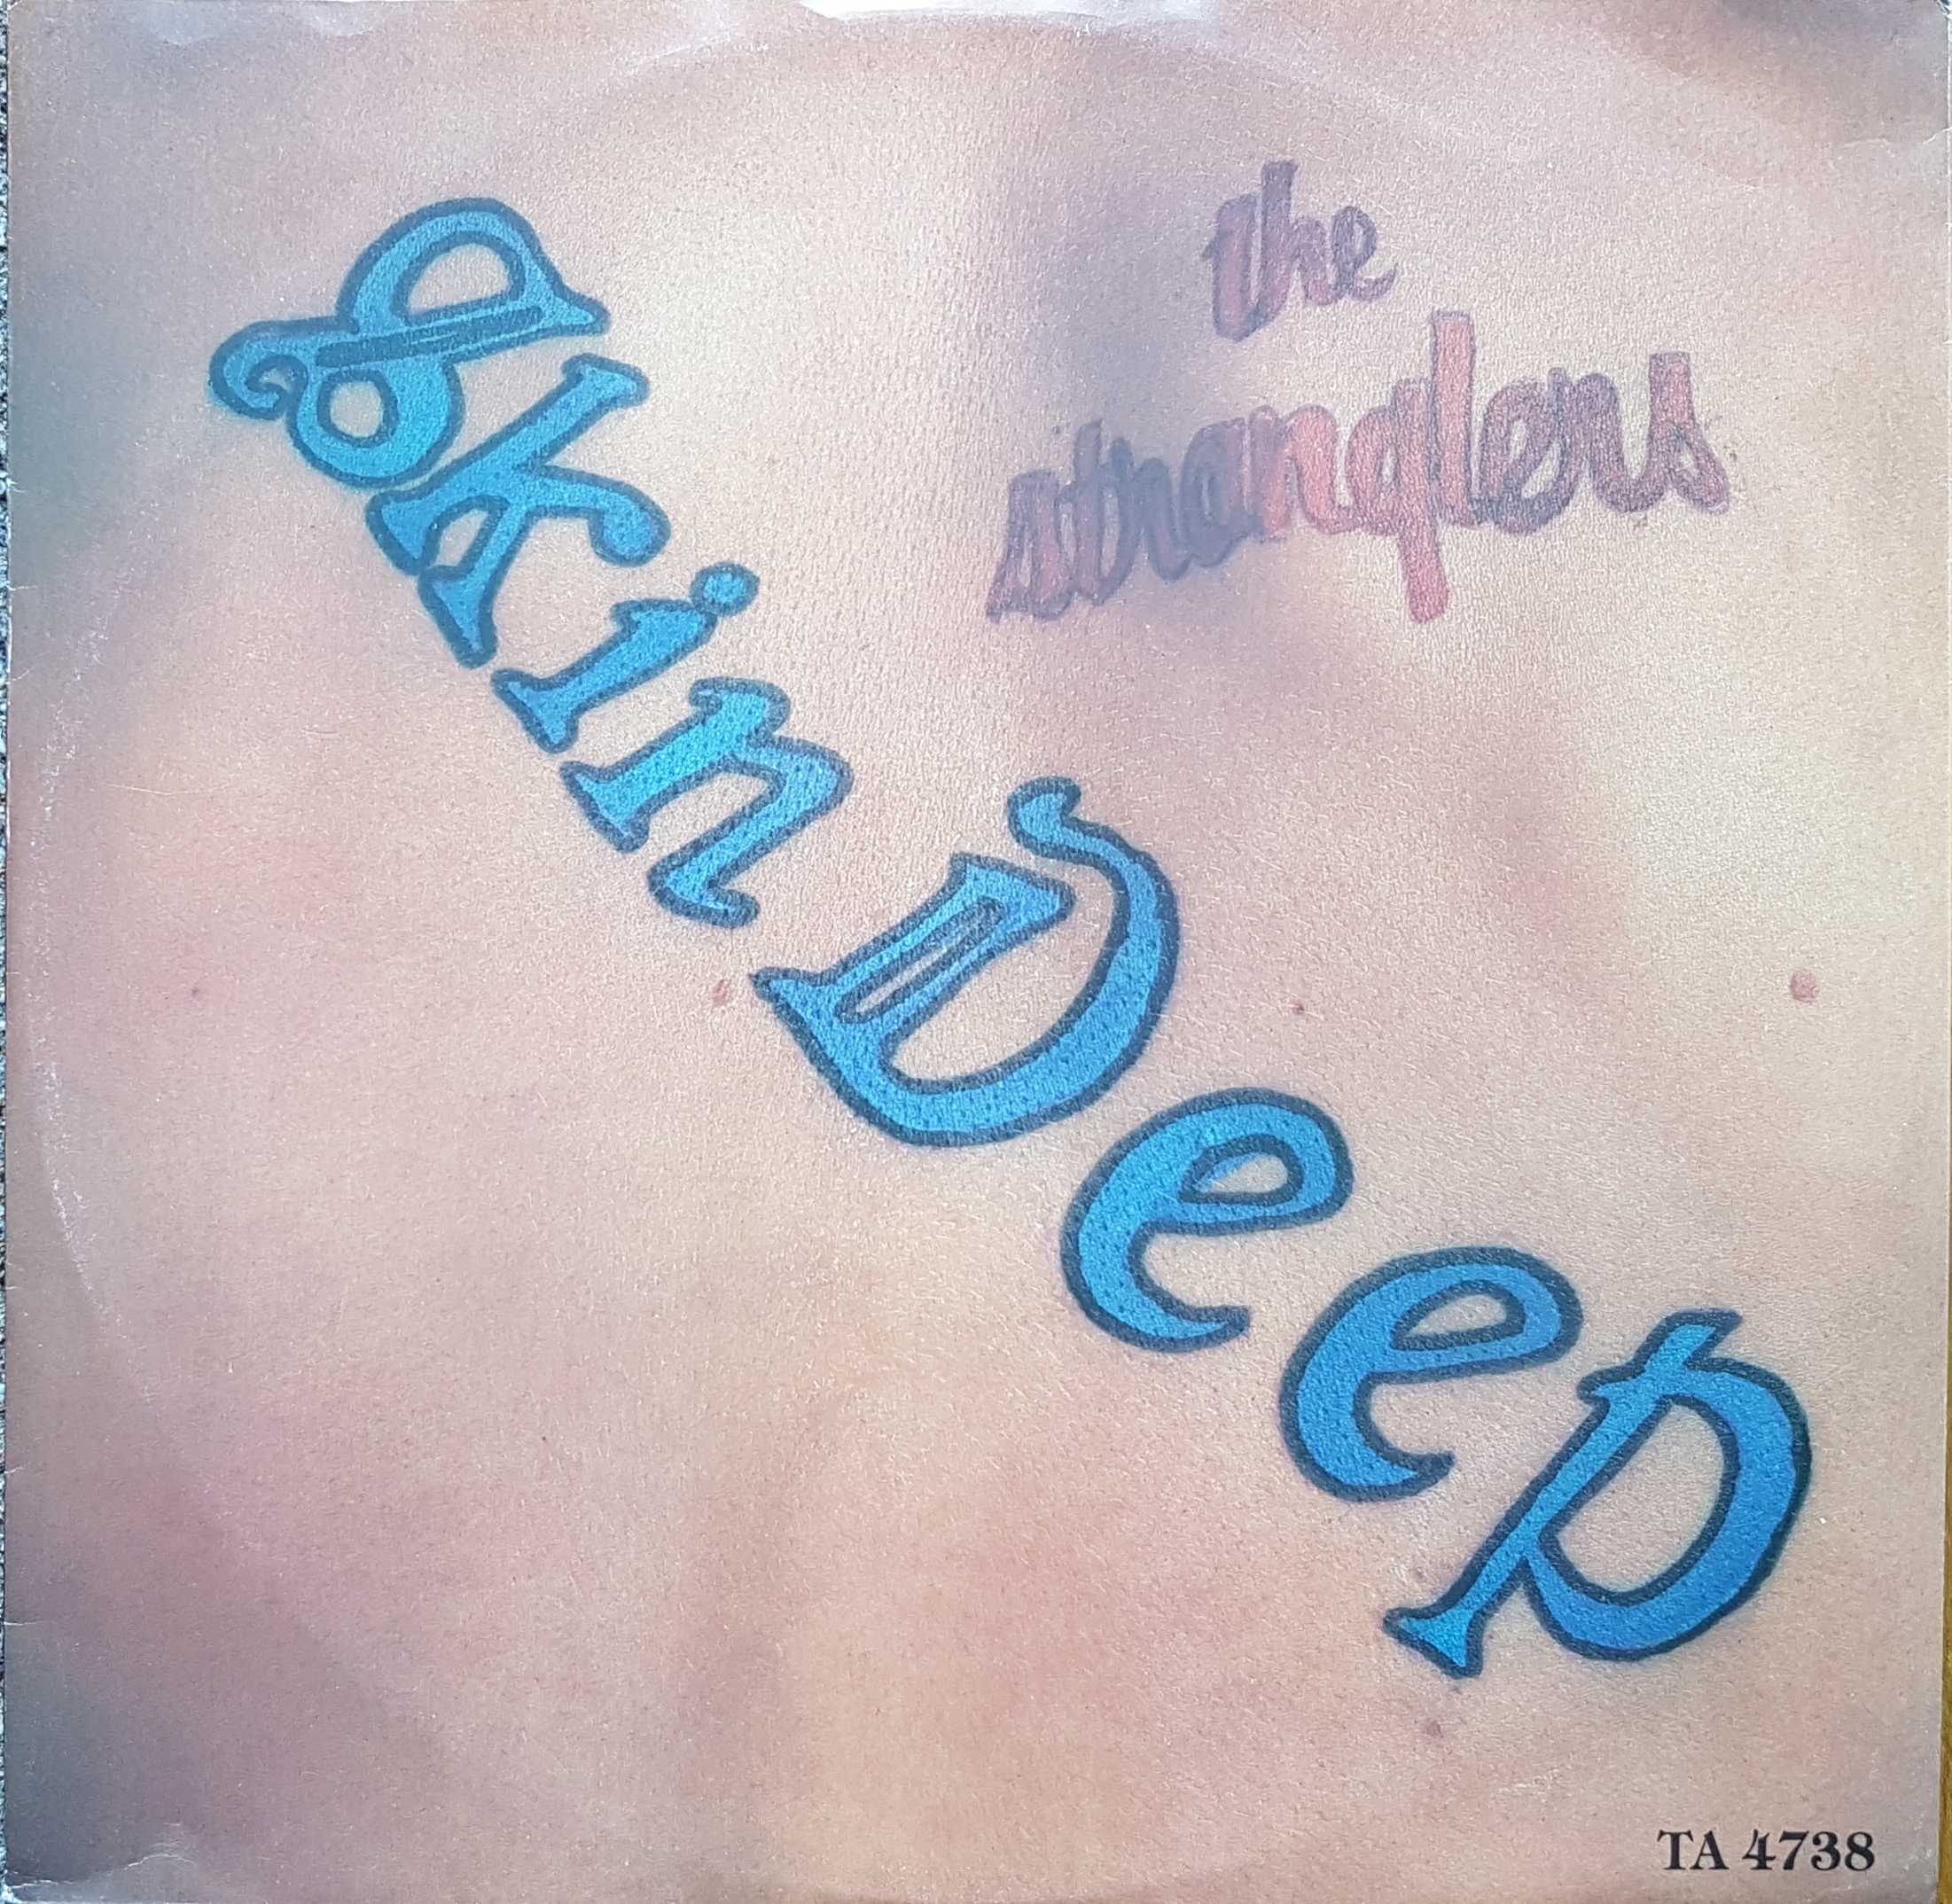 Picture of TA 4738 Skin deep by artist The Stranglers